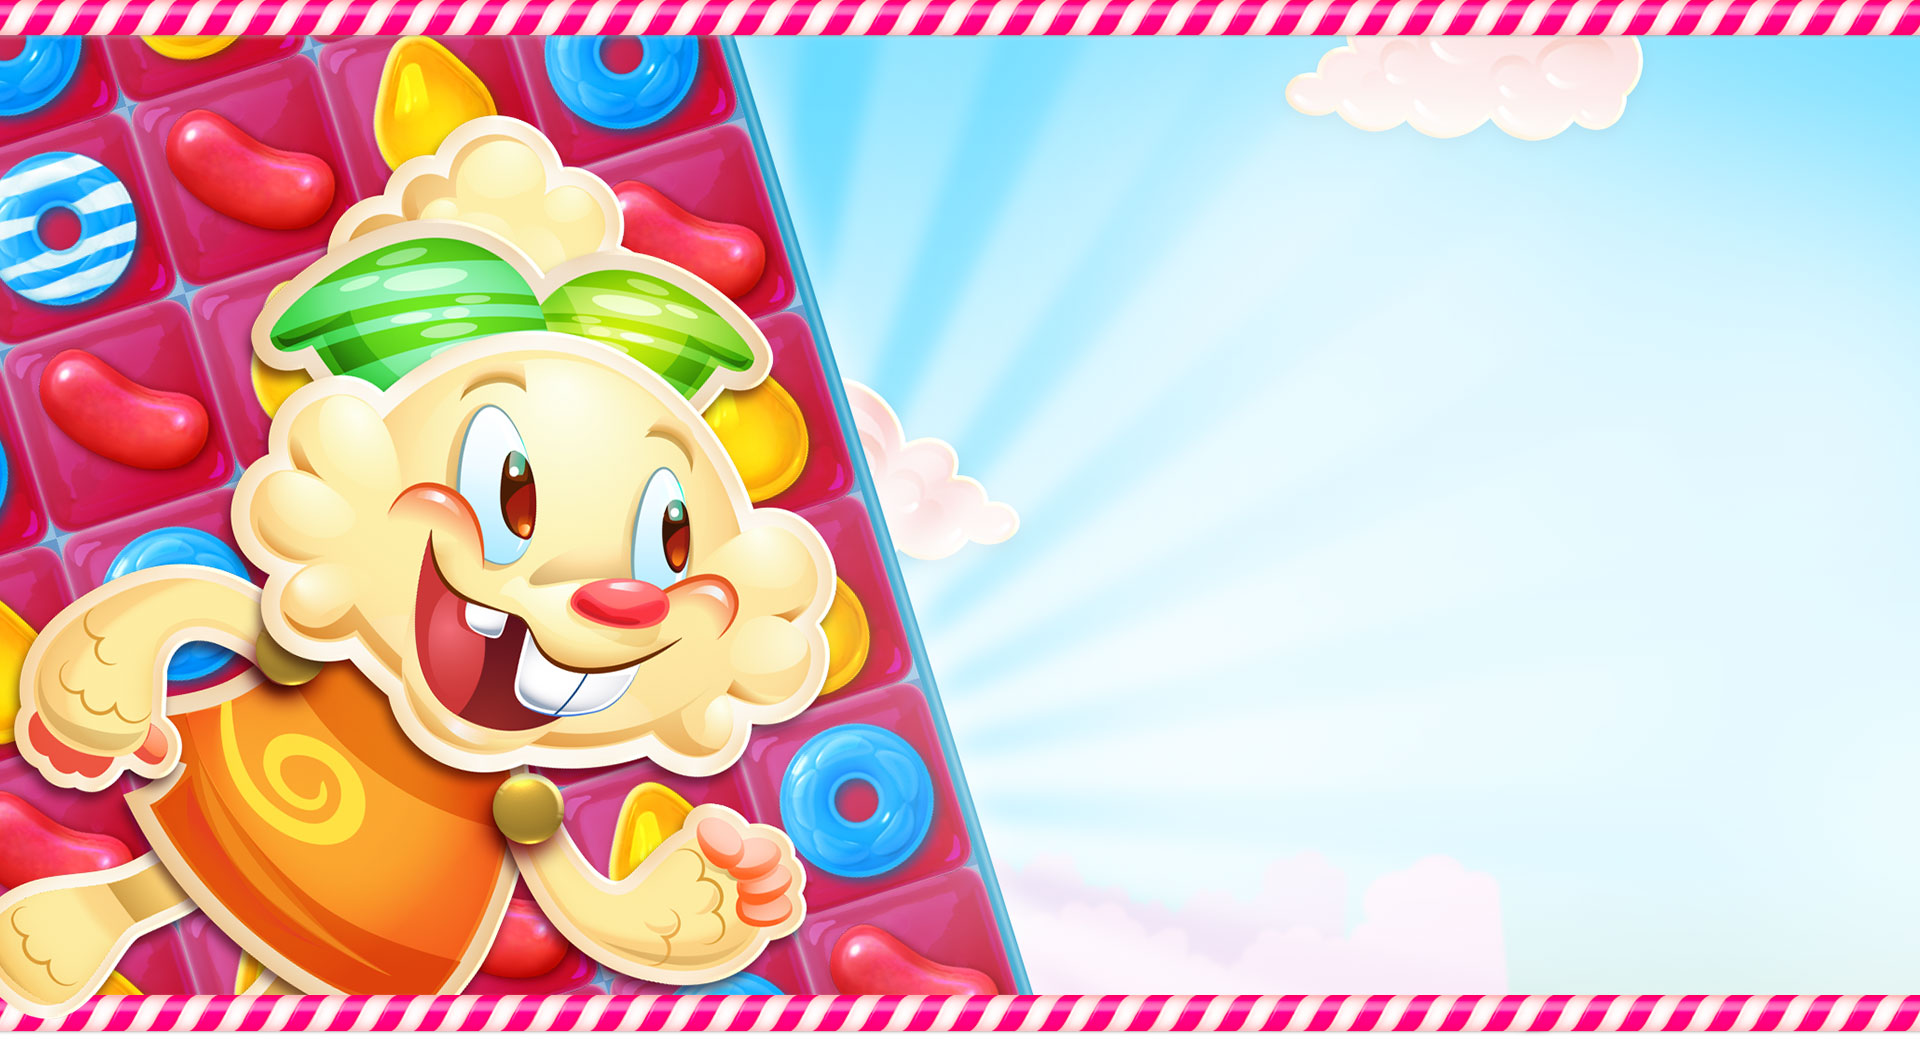 Jenny smiles happily in front of a Candy Crush Jelly Saga game board.